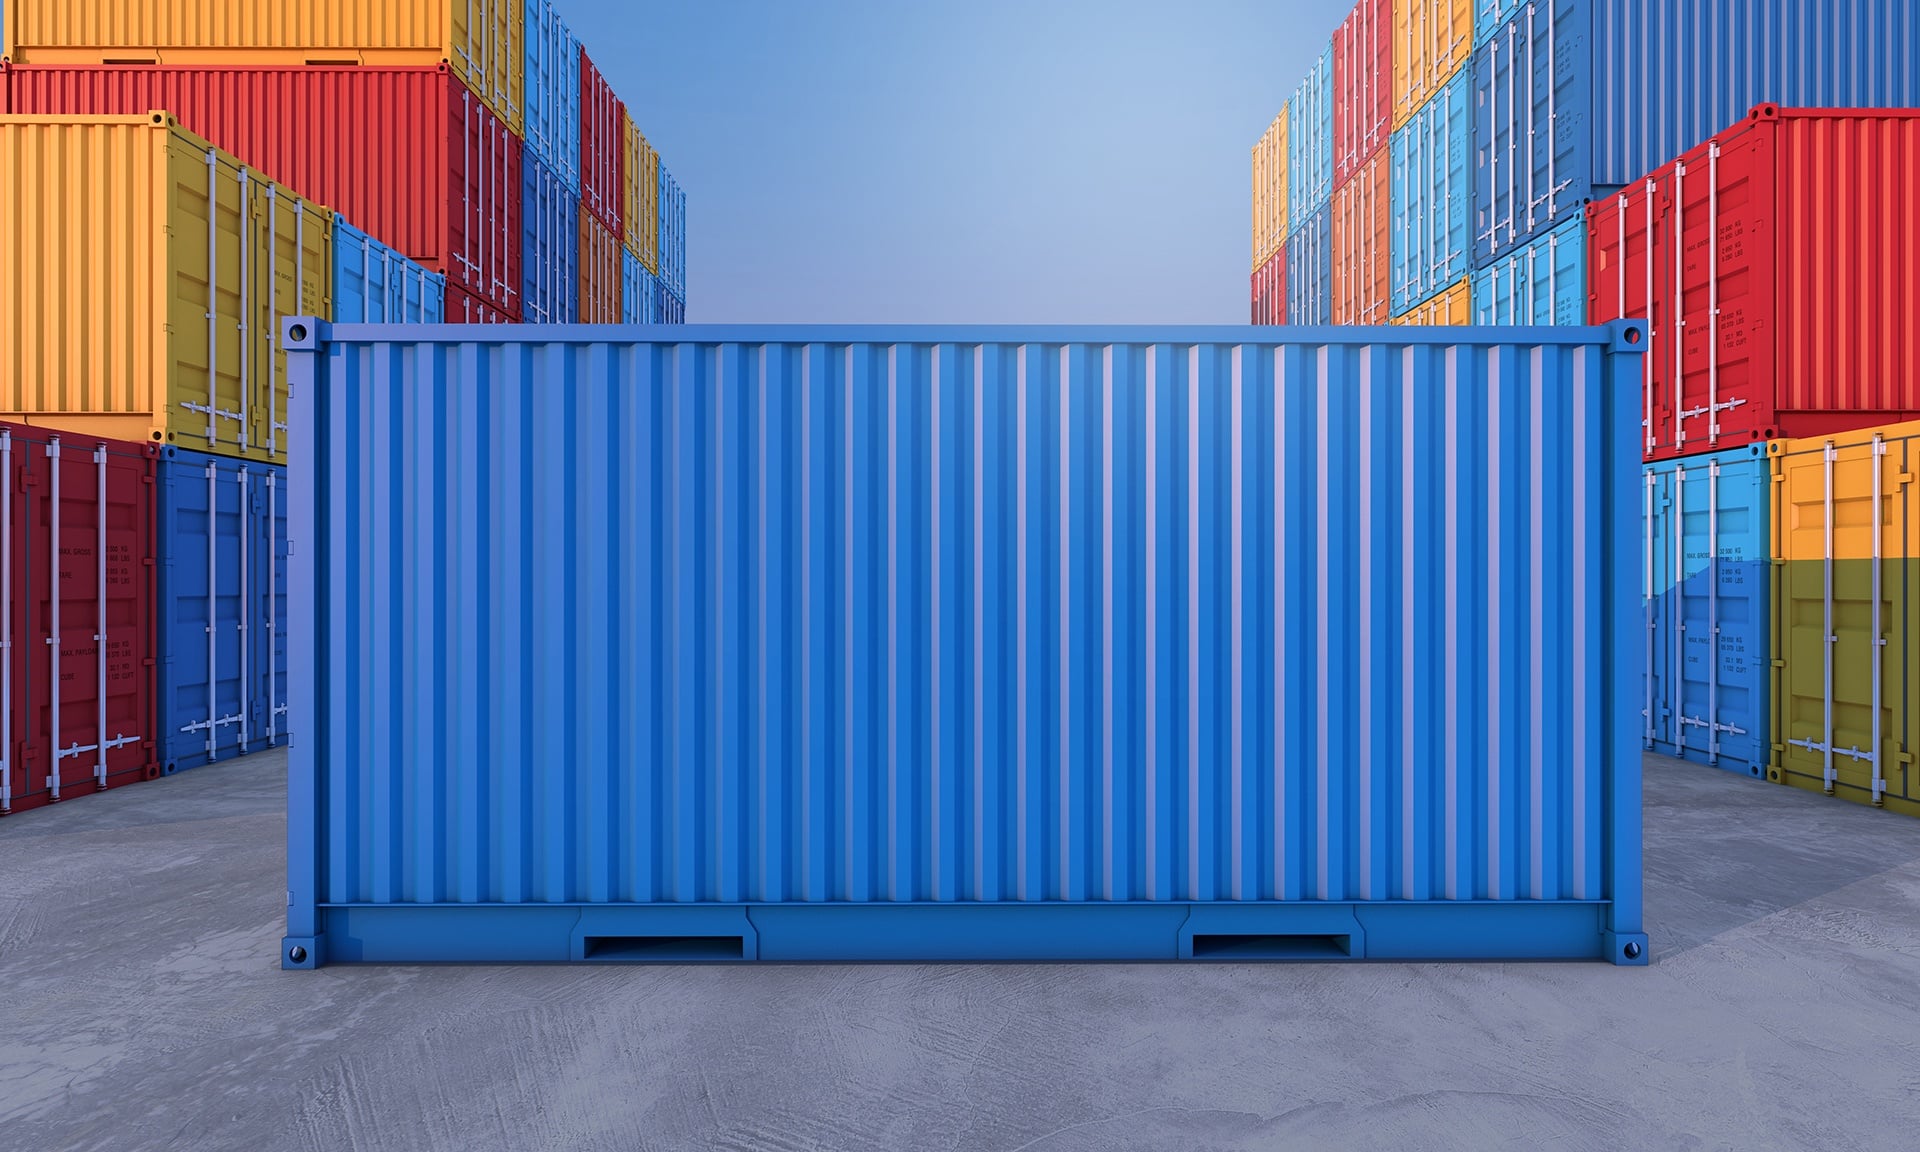 a large blue container sitting in front of many colorful containers